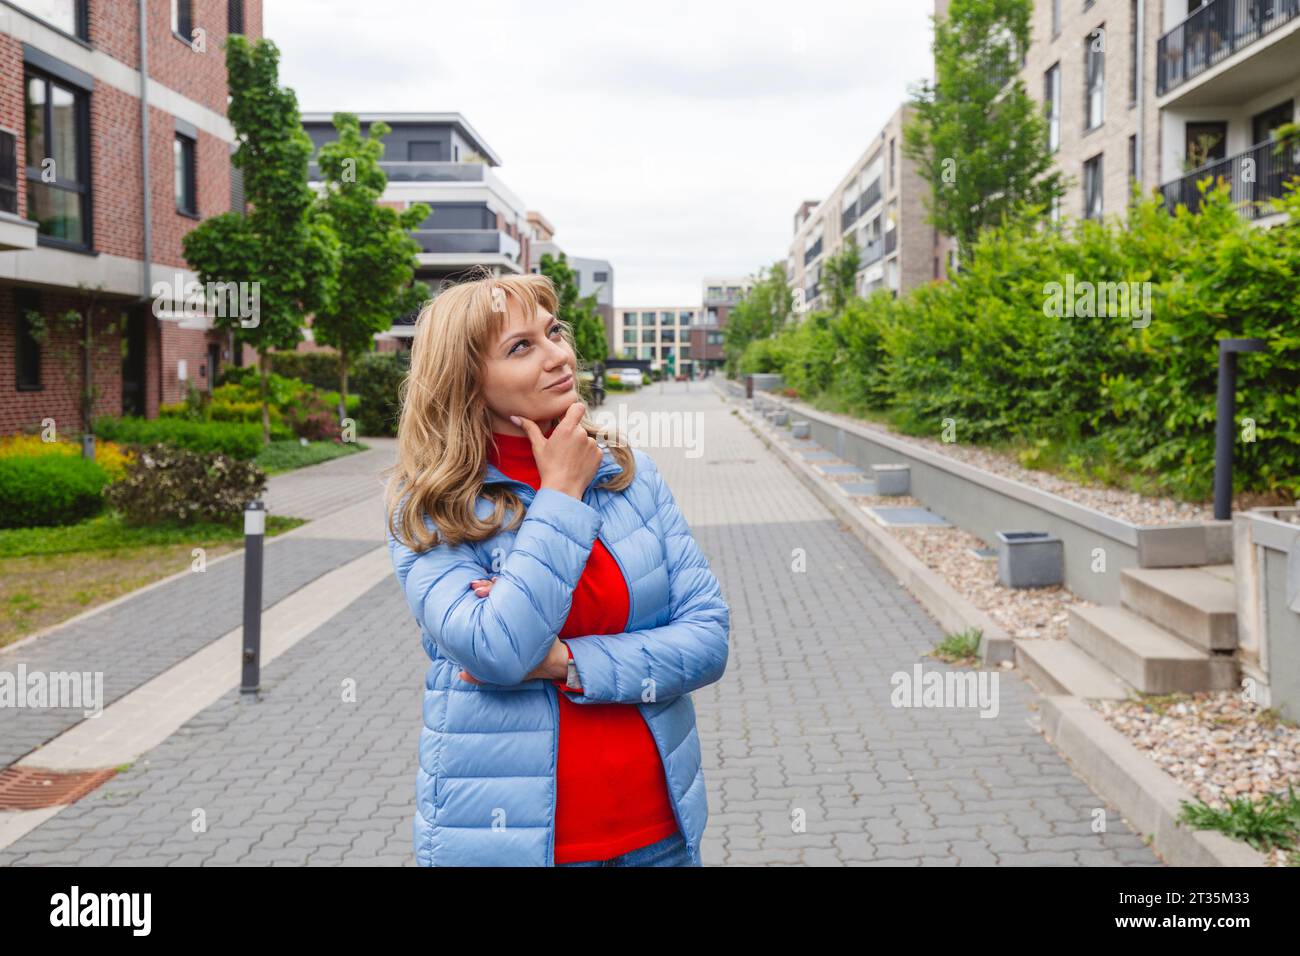 Contemplative woman standing near residential area Stock Photo